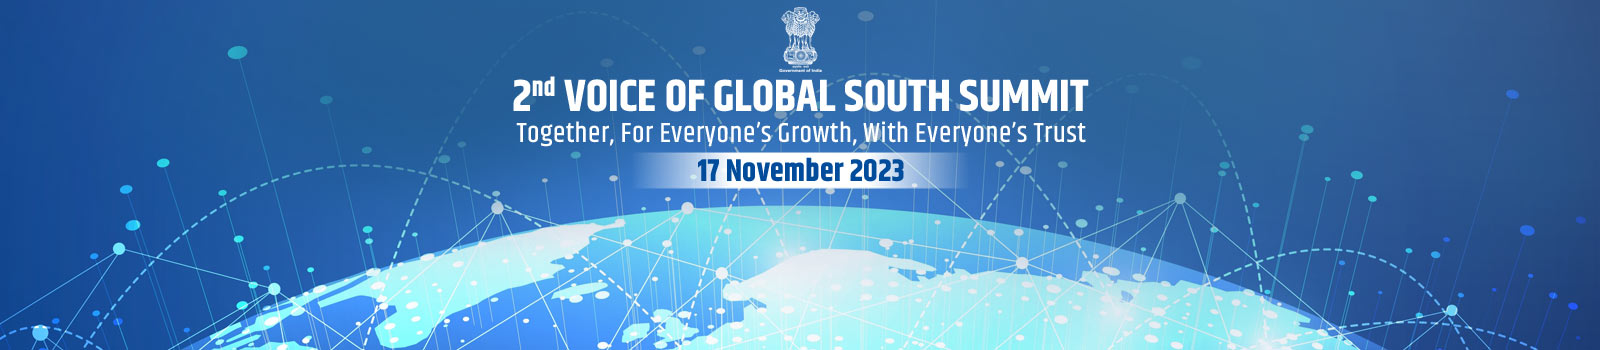 2nd Voice of Global South Summit 2023